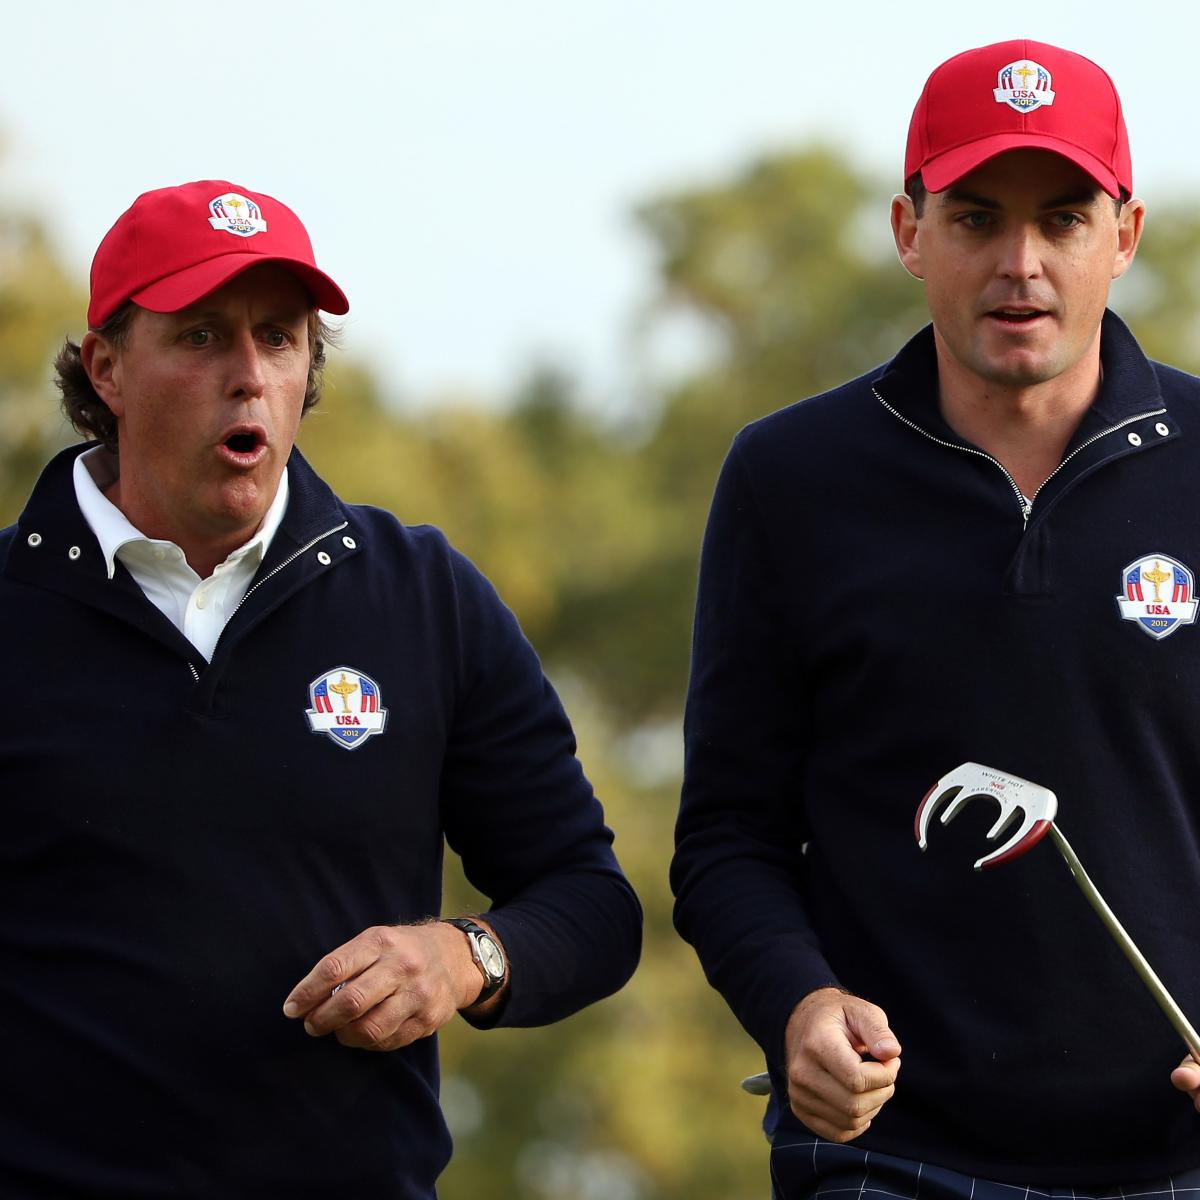 Ryder Cup Pairings Ranking the Foursomes on Day 2 News, Scores